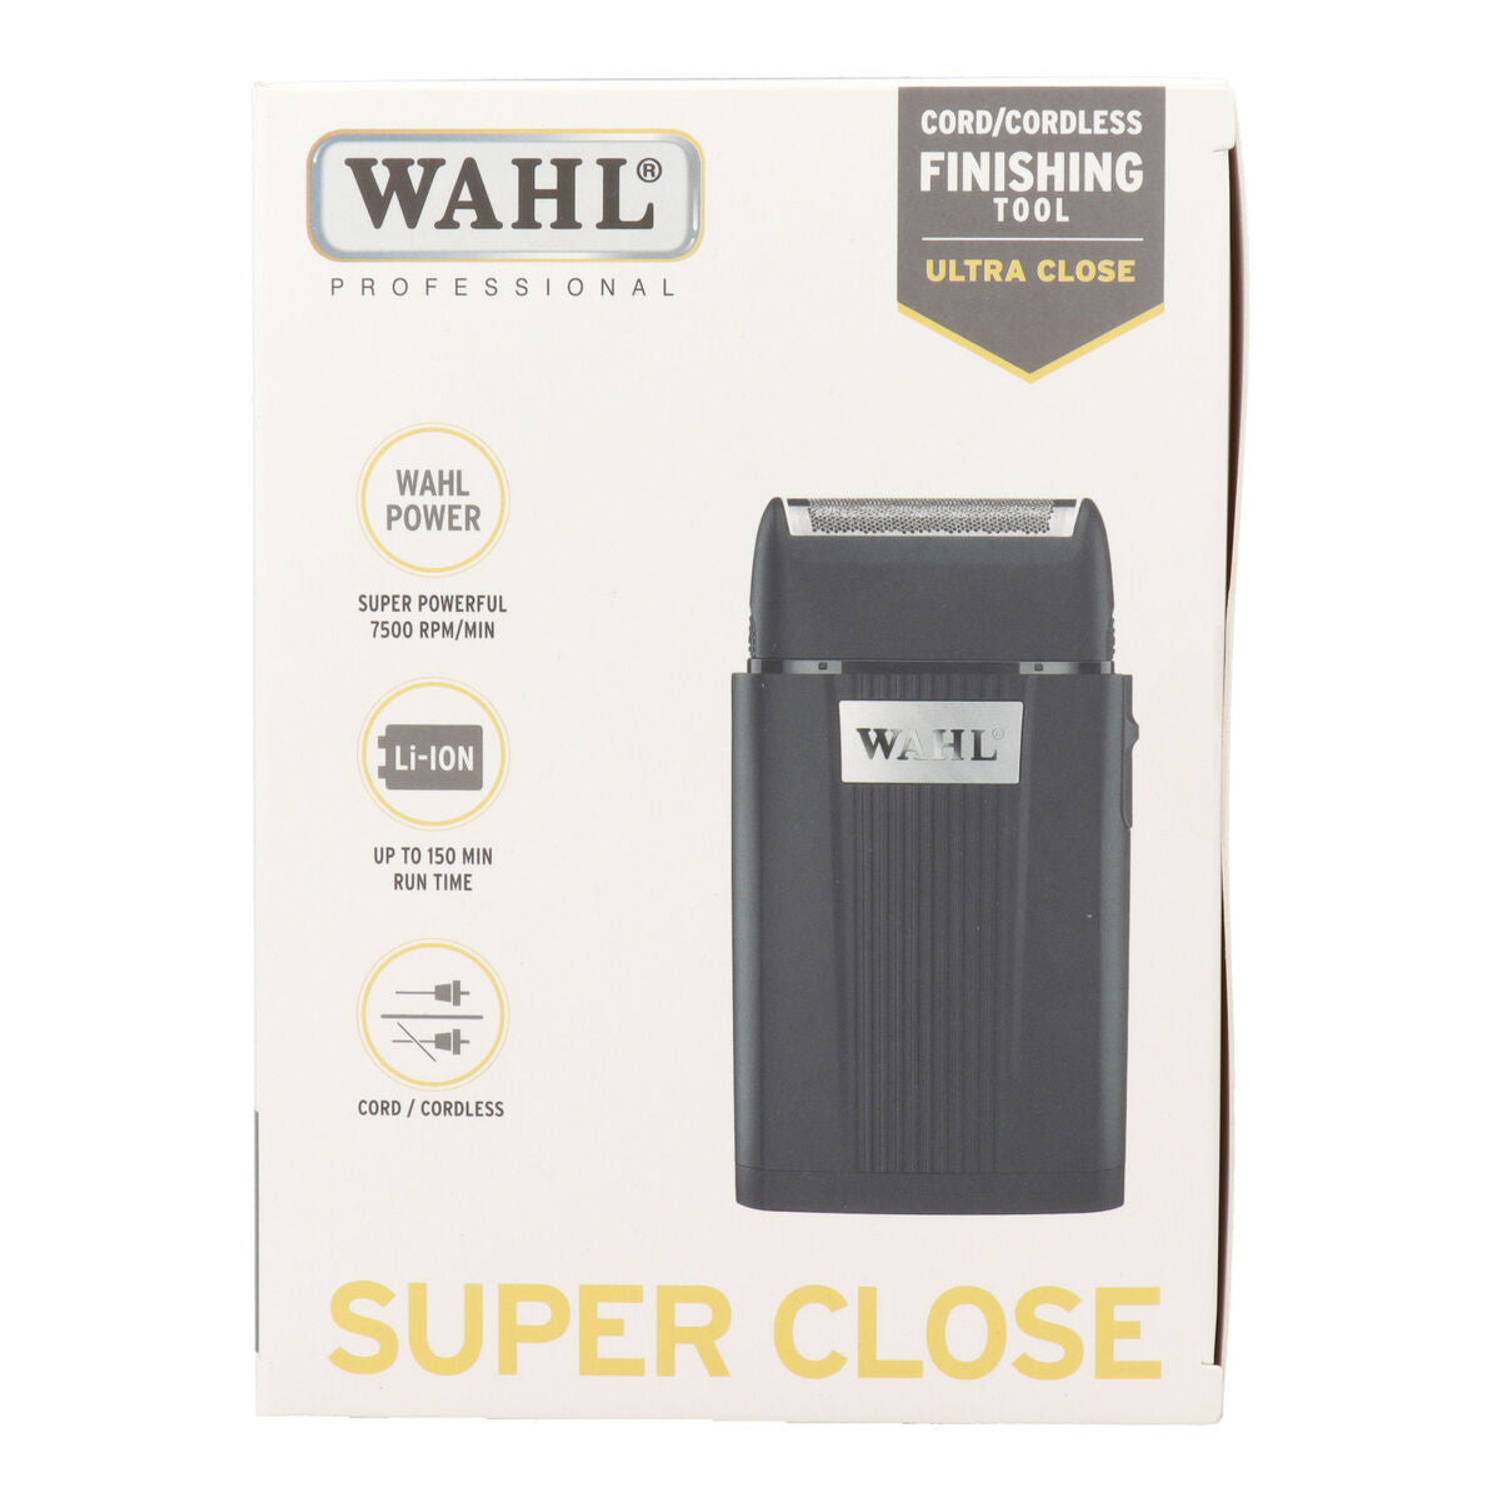 Wahl Professional Super Close shaver, finishing tool cordless